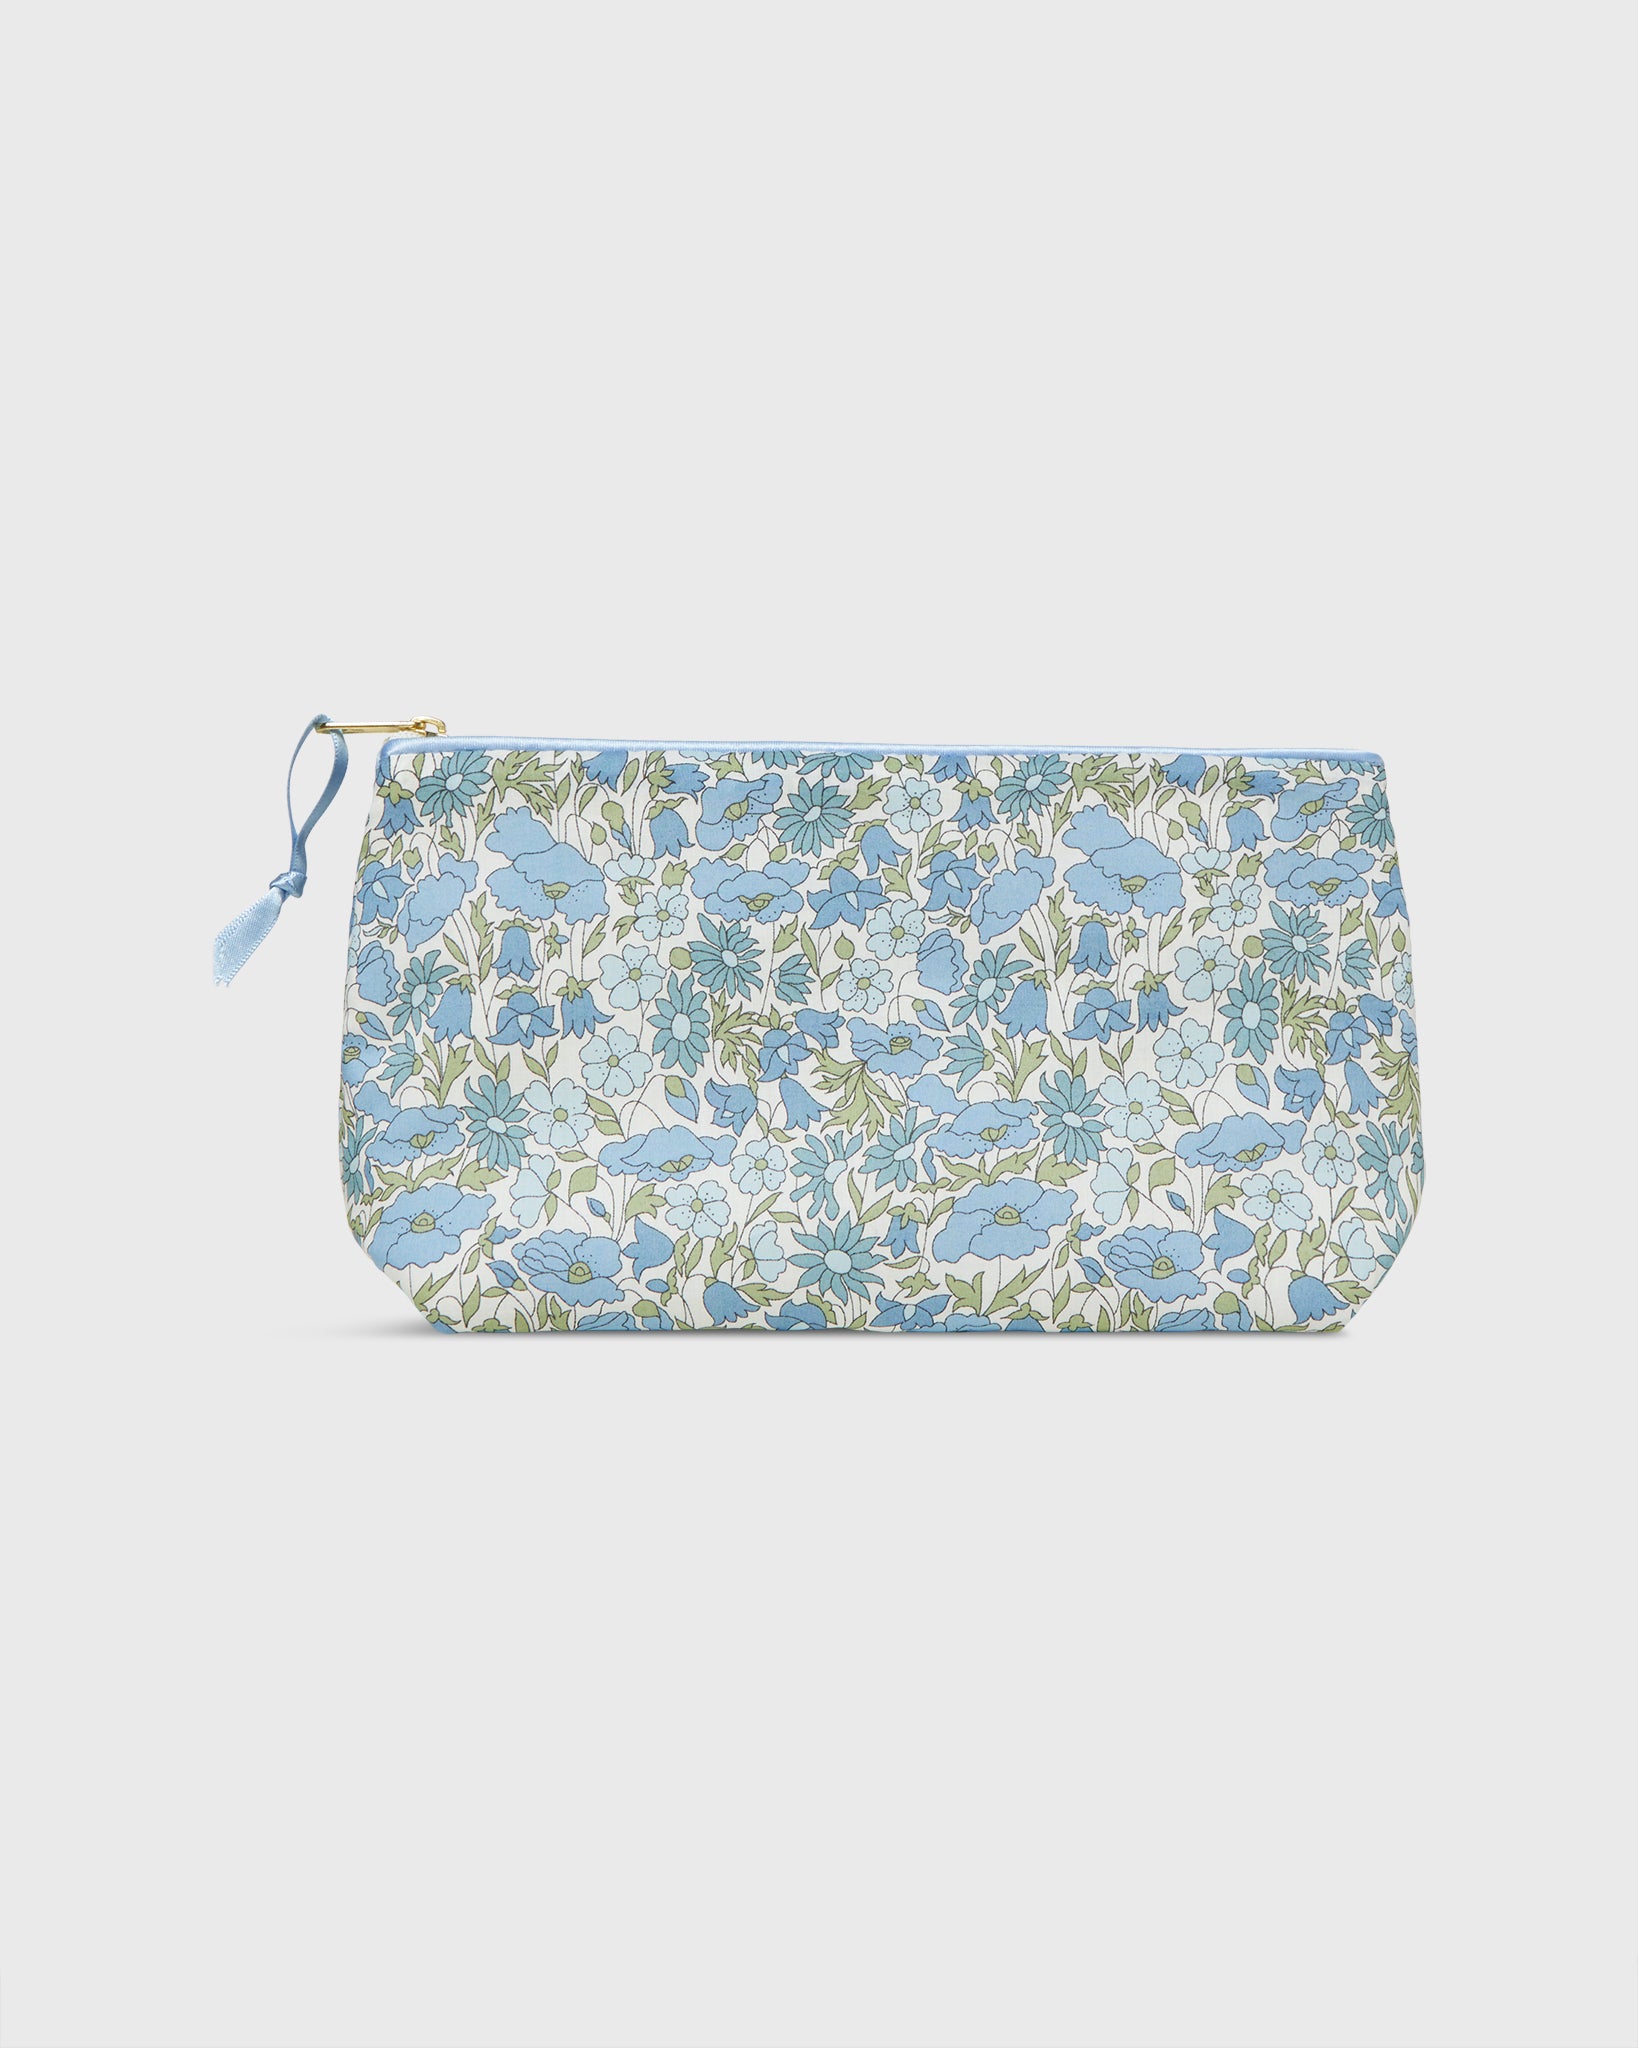 Soft Small Cosmetic Bag in Light Blue Poppy & Daisy Liberty Fabric